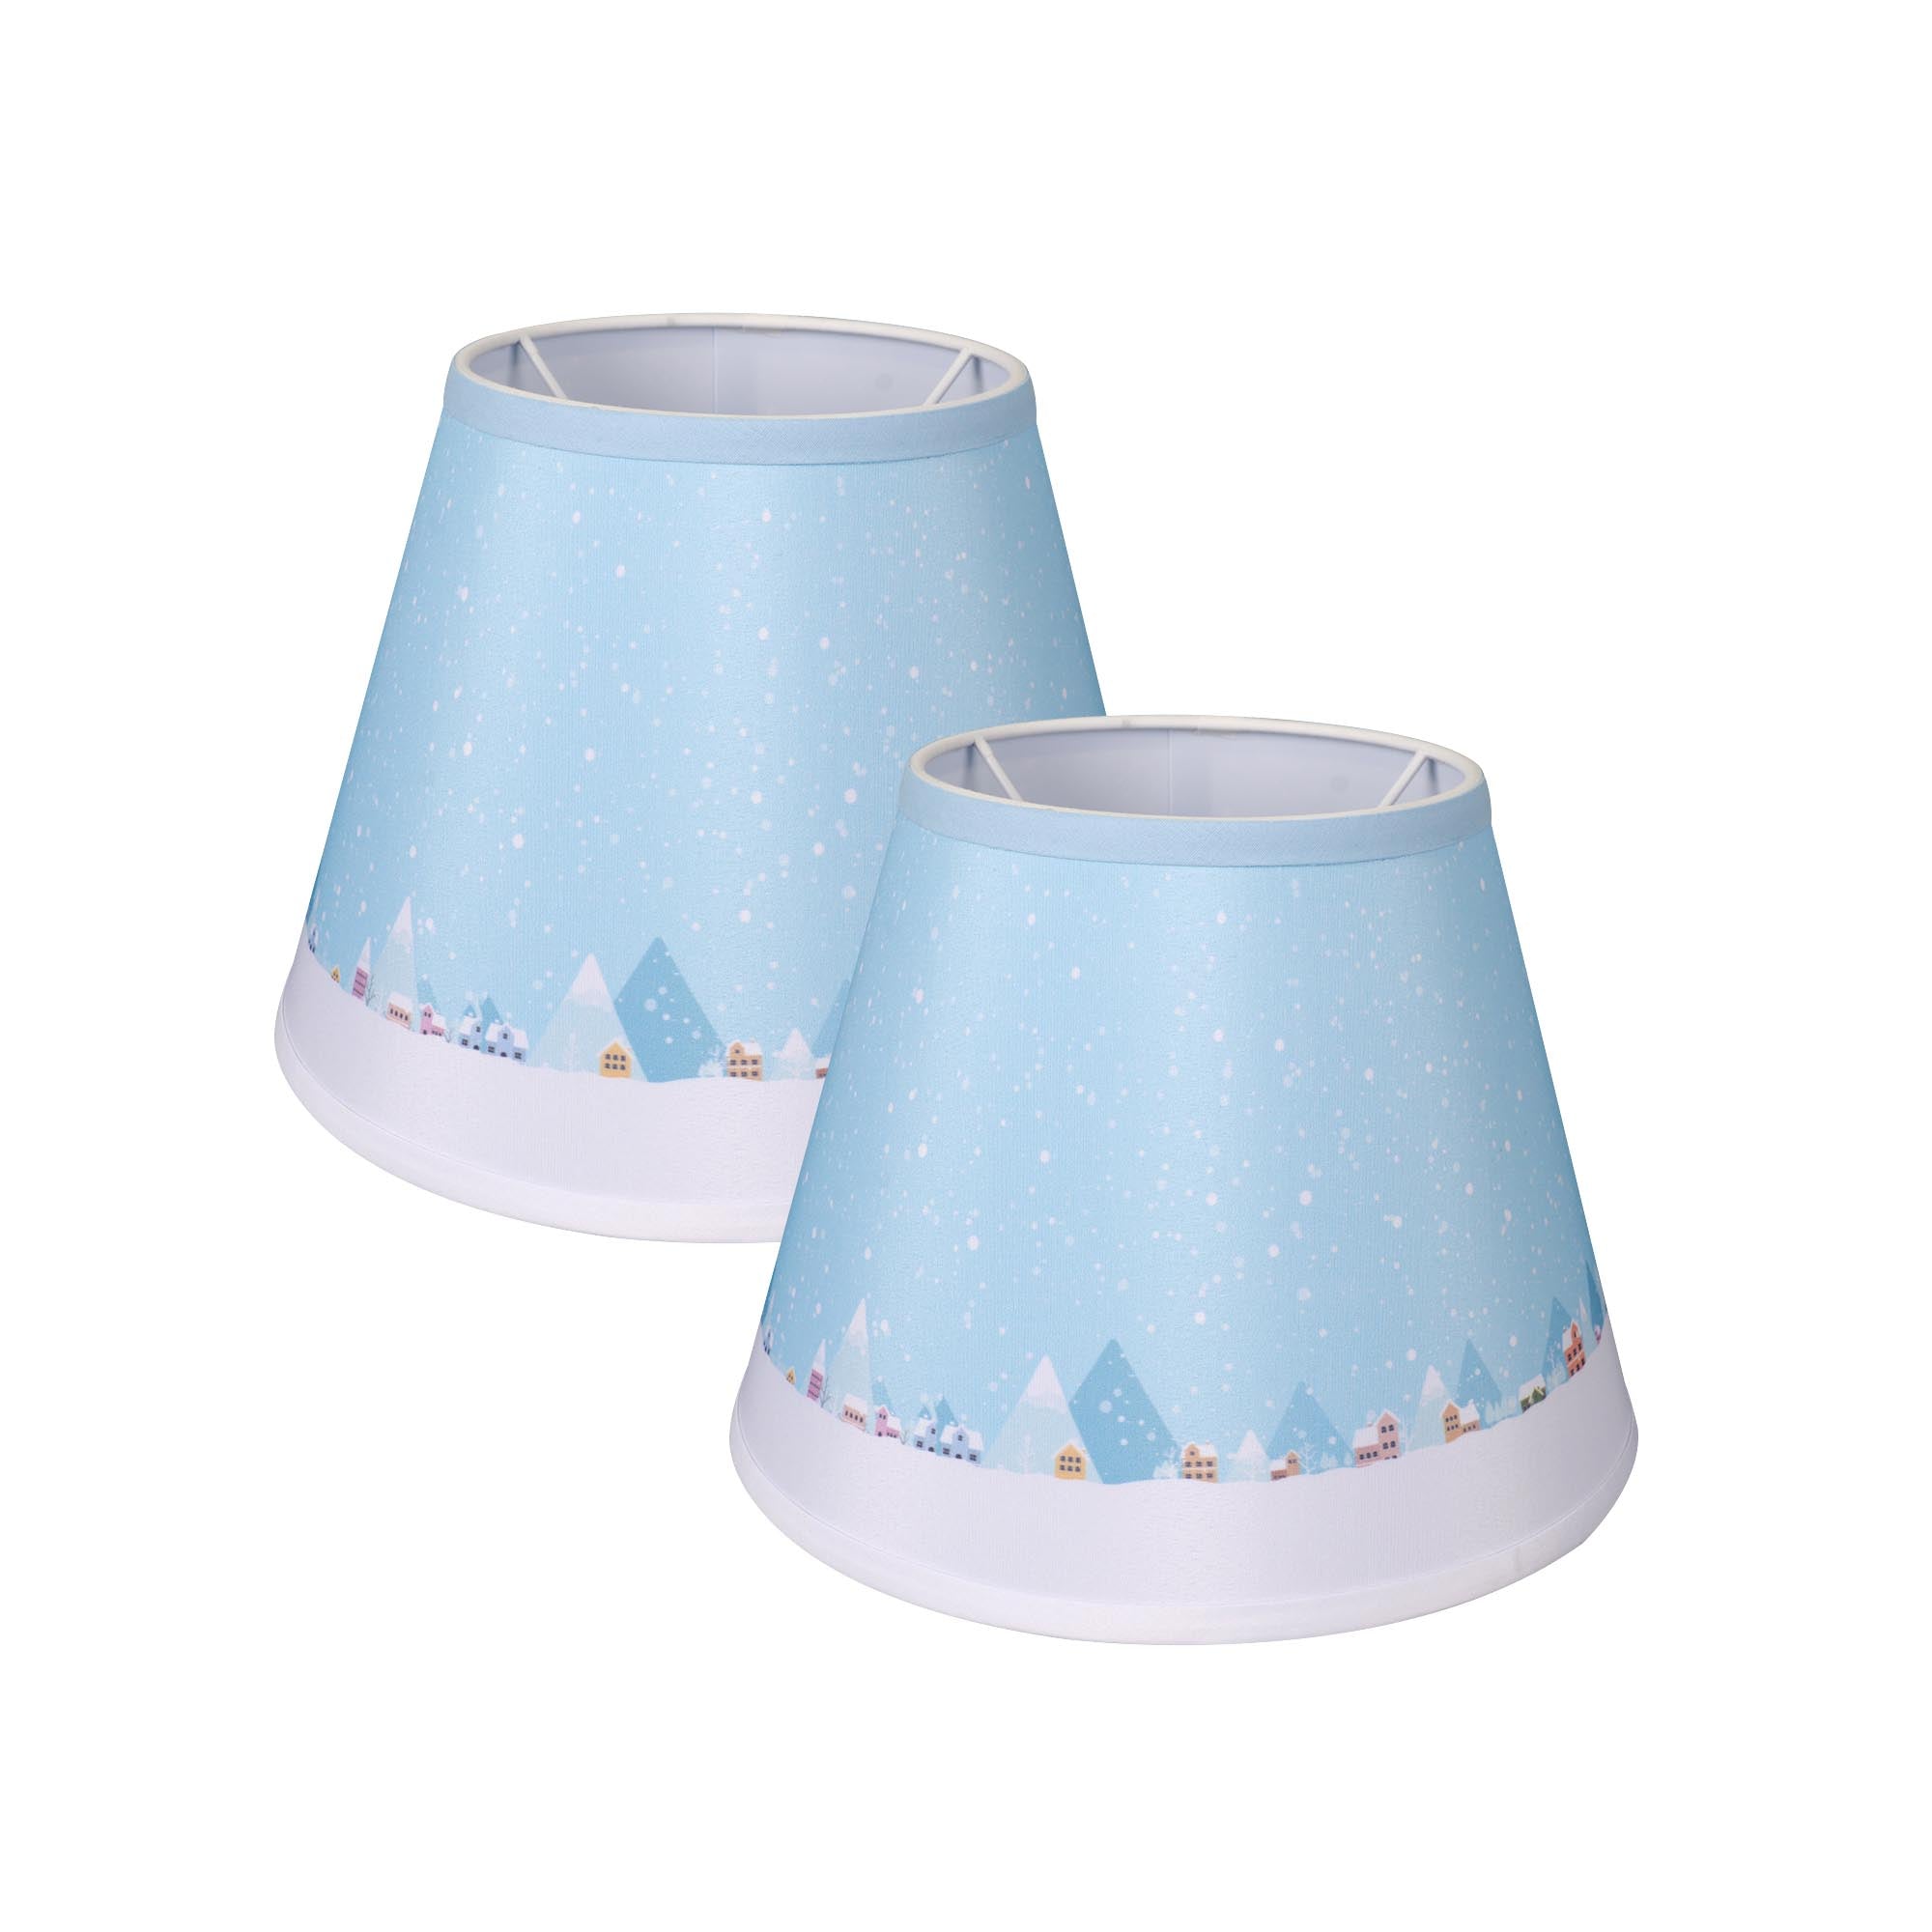 Carro Home Winter Collection Limited Edition Round Empire Shape Lamp Shade 6&quot;x10&quot;x7.5&quot; – Snowy Village (Set of 2)